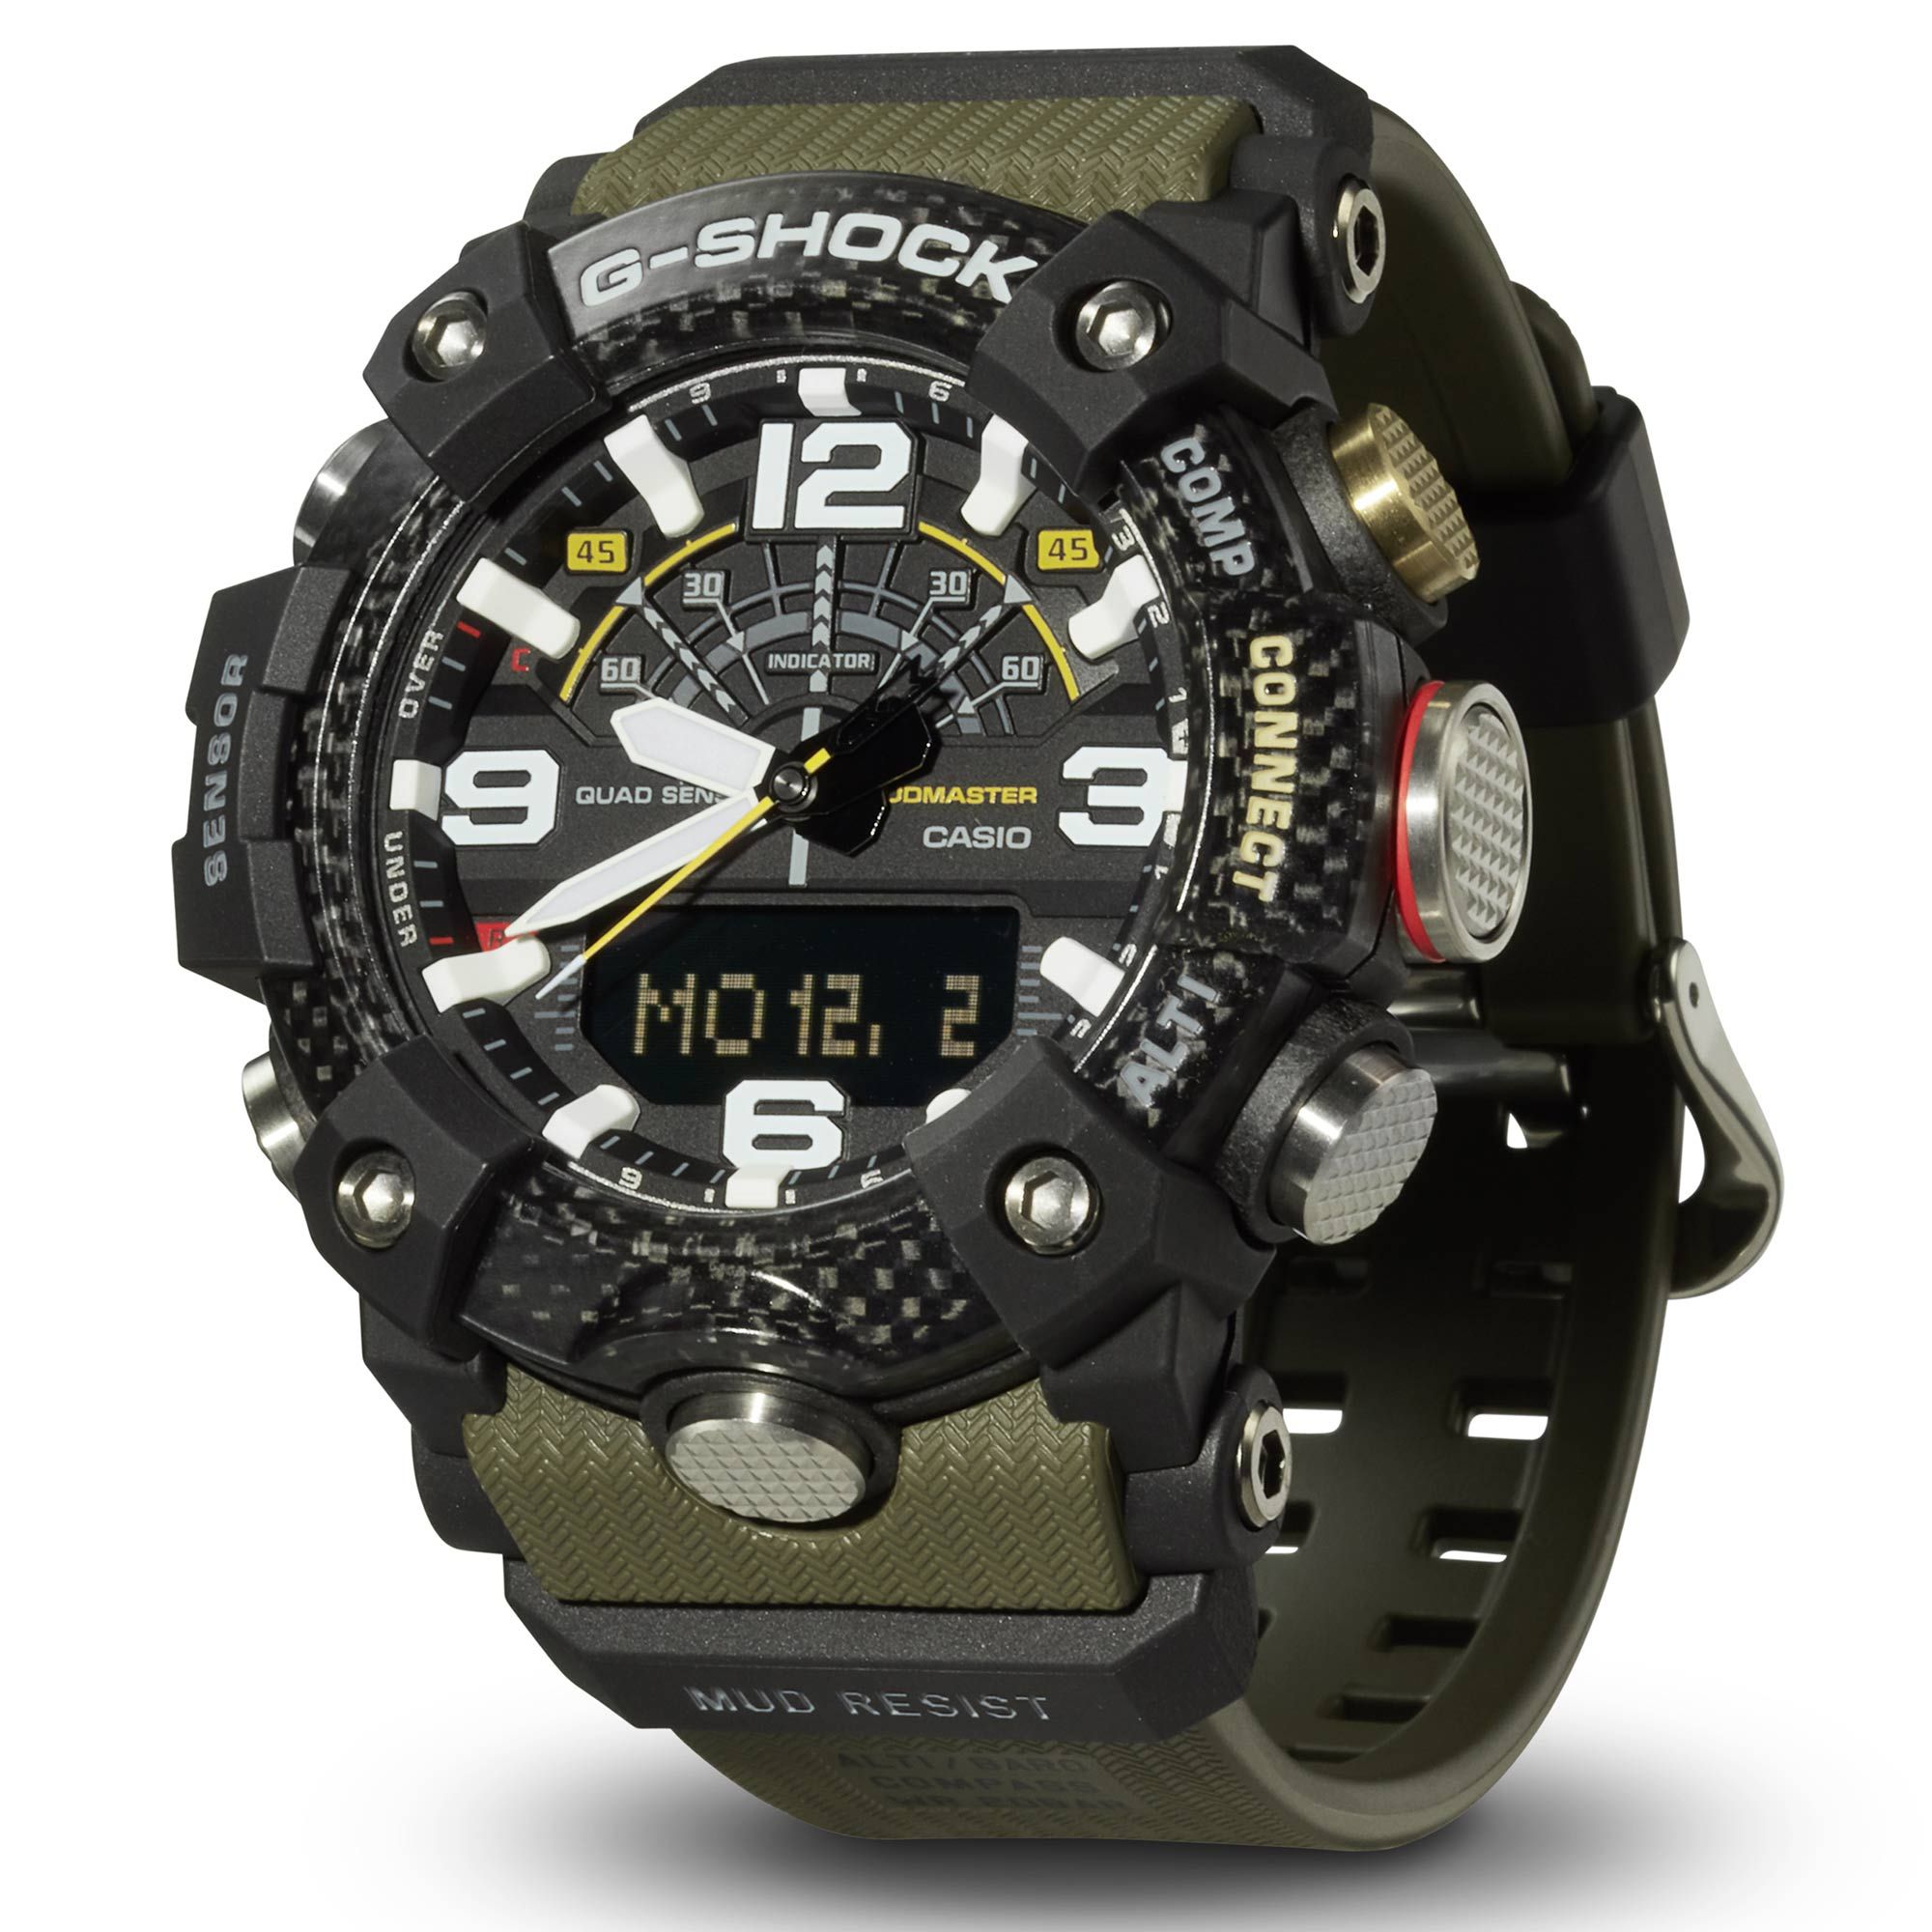 This Casio G-shock-mudmaster Analogue-Digital Watch for Men is the perfect timepiece to wear or to gift. It's Black 50 mm Round case combined with the comfortable Green Plastic watch band will ensure you enjoy this stunning timepiece without any compromise. Operated by a high quality Quartz movement and water resistant to 20 bars, your watch will keep ticking. Stylish- Sporty and a modern design, very suitable for Men -The watch has a calendar function: Day-Date, Bluetooth, Stop Watch, Compass, Altimeter,Thermometer High quality 21 cm length and 24 mm width Green Plastic strap with a Buckle Case diameter: 50 mm,case thickness: 17 mm, case colour: Black and dial colour: Black